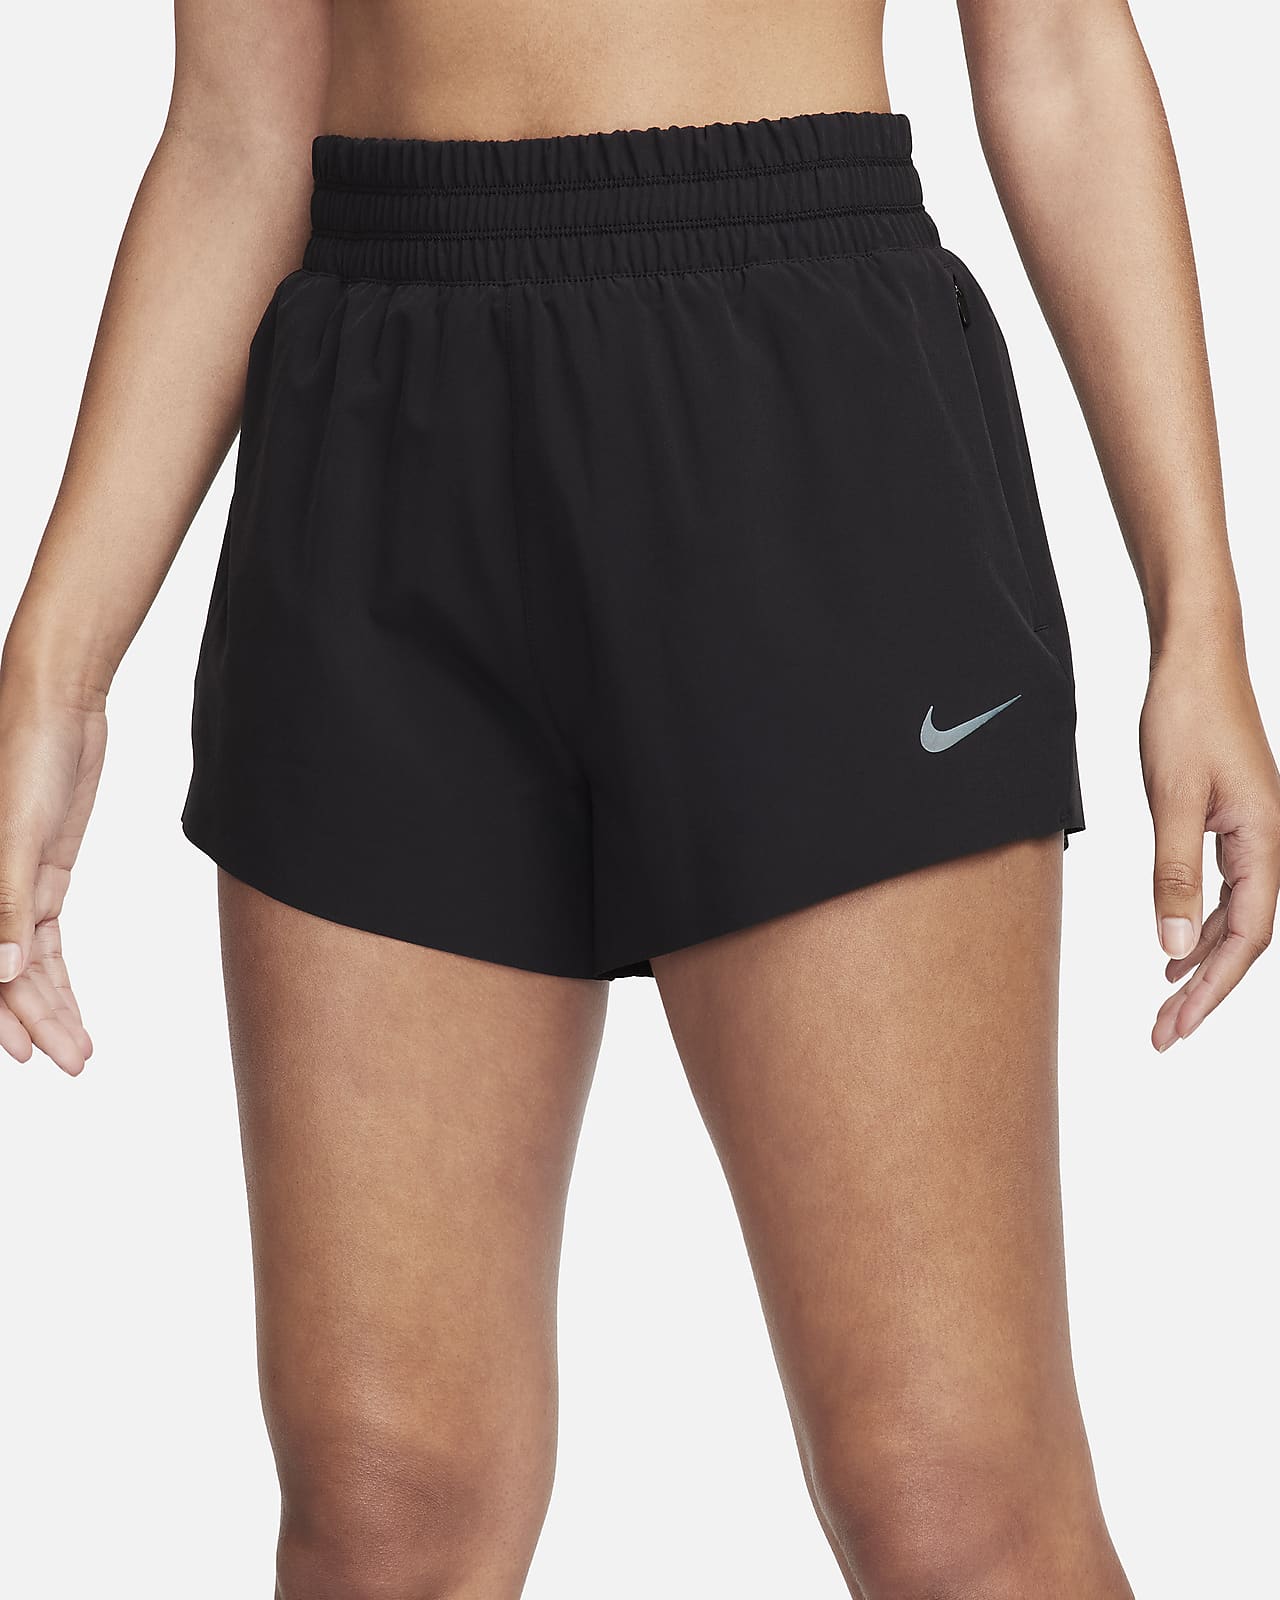 Black Under Shorts with Pockets  Thigh Protection Shorts - 8